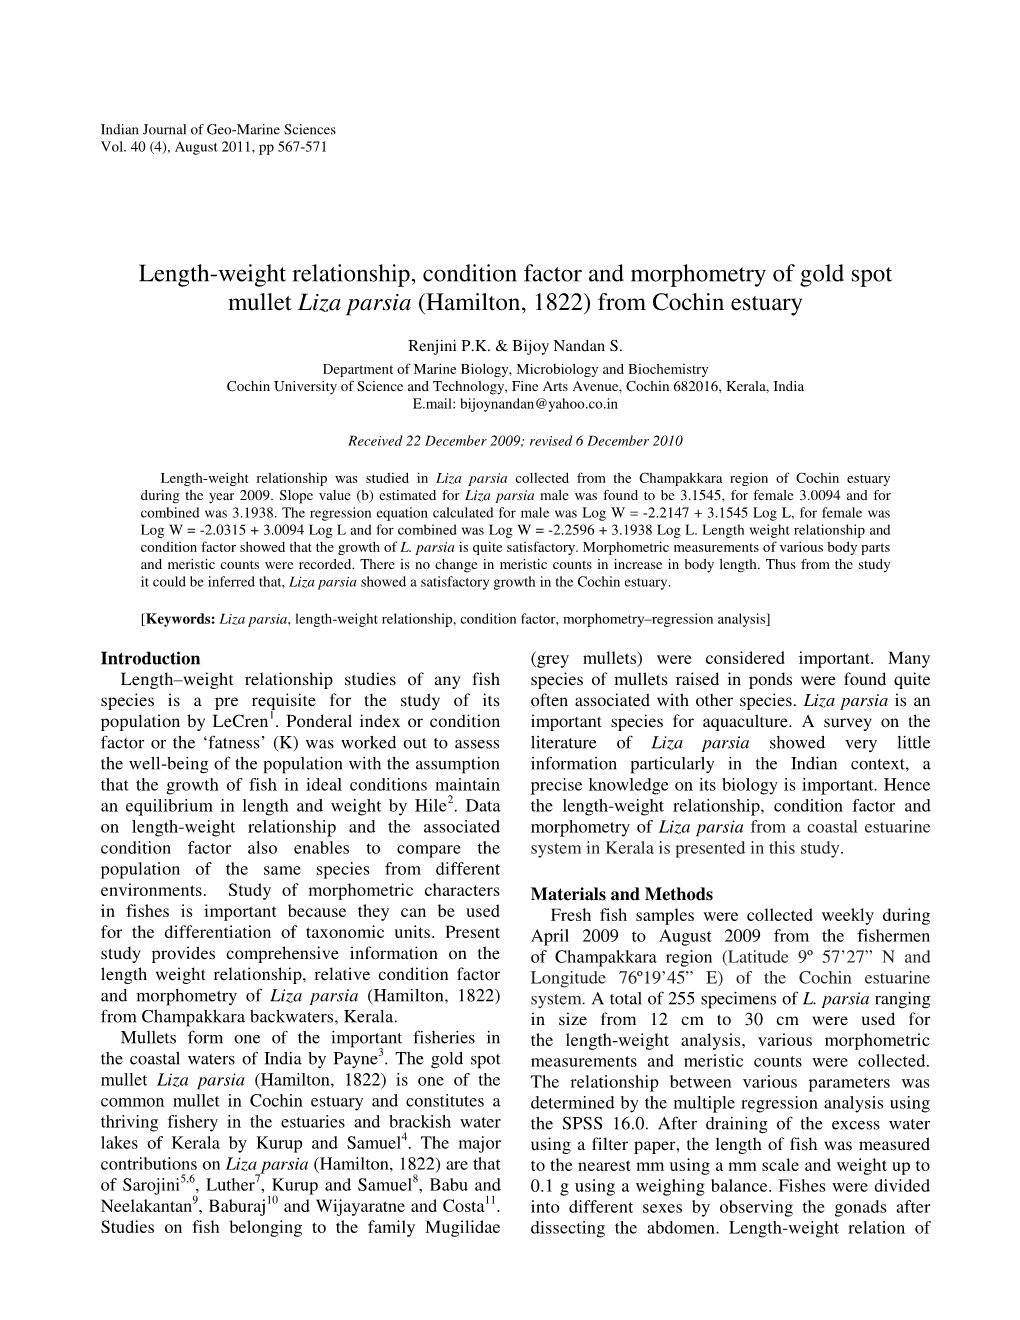 Length-Weight Relationship, Condition Factor and Morphometry of Gold Spot Mullet Liza Parsia (Hamilton, 1822) from Cochin Estuary